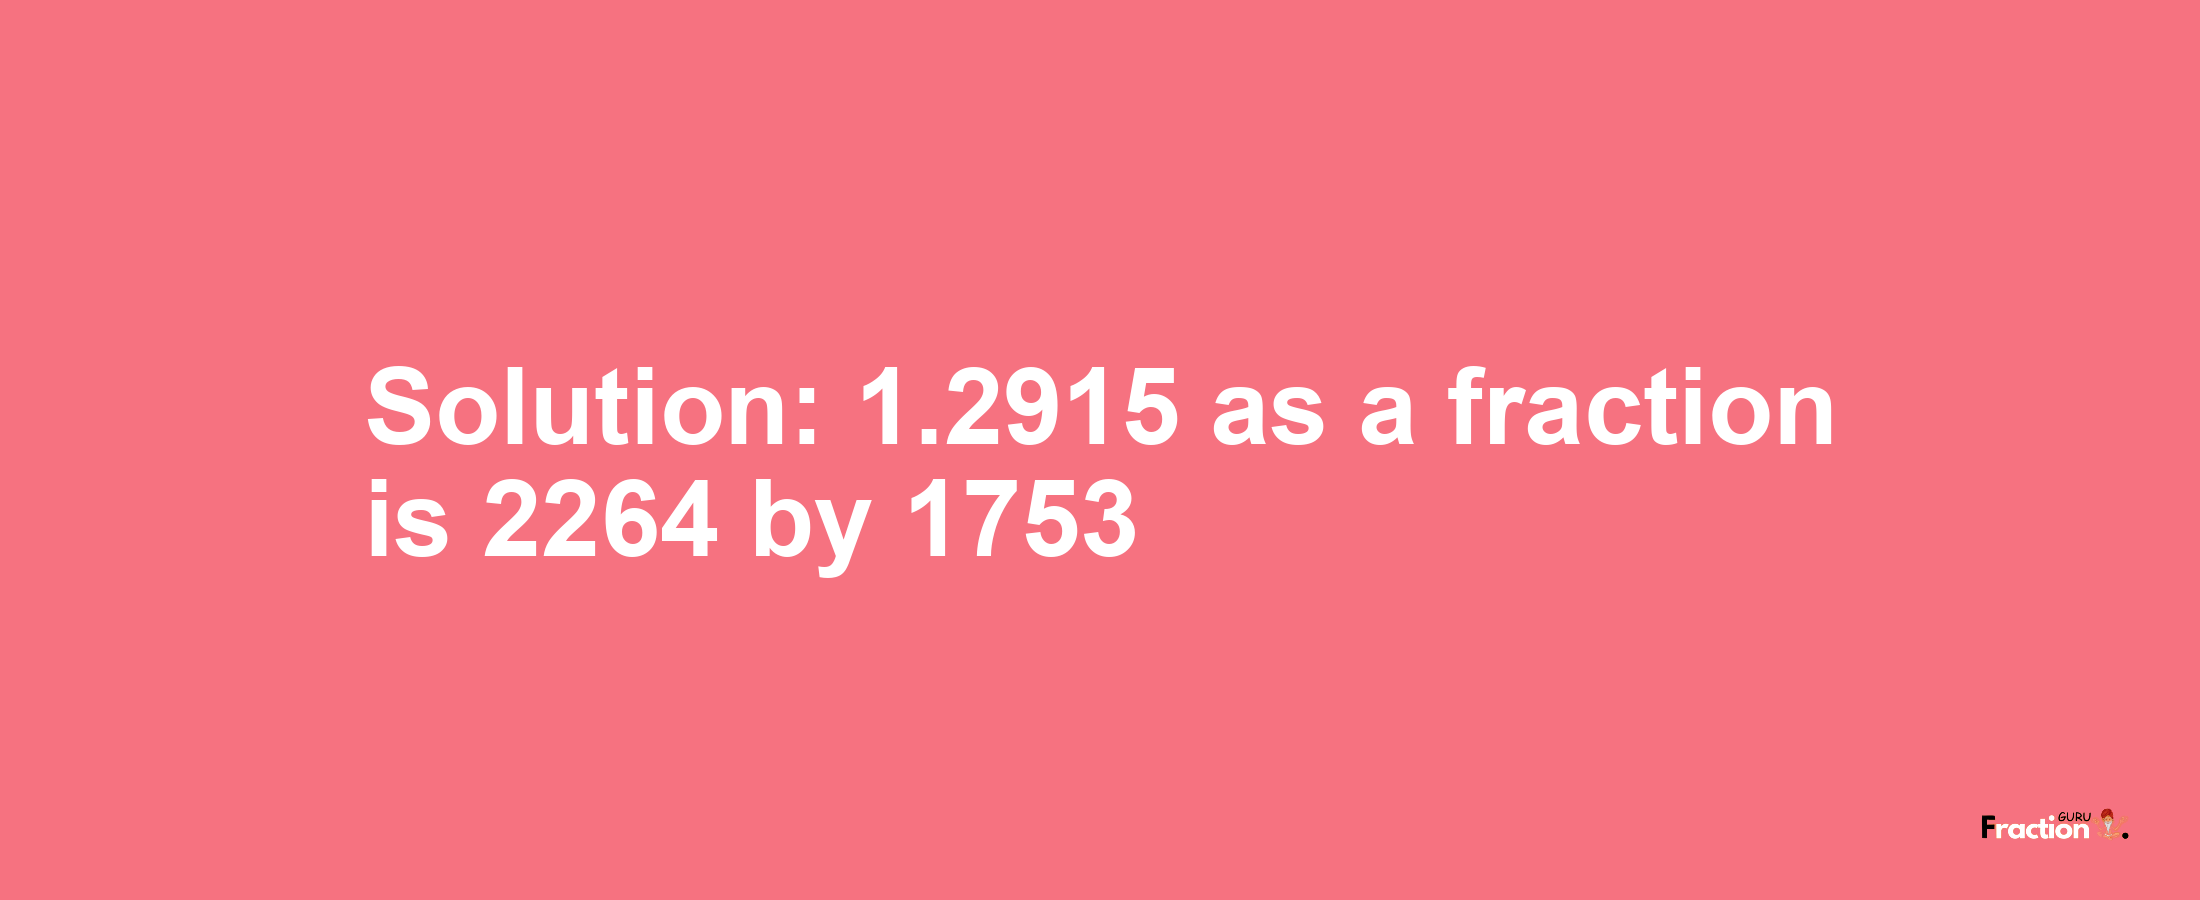 Solution:1.2915 as a fraction is 2264/1753